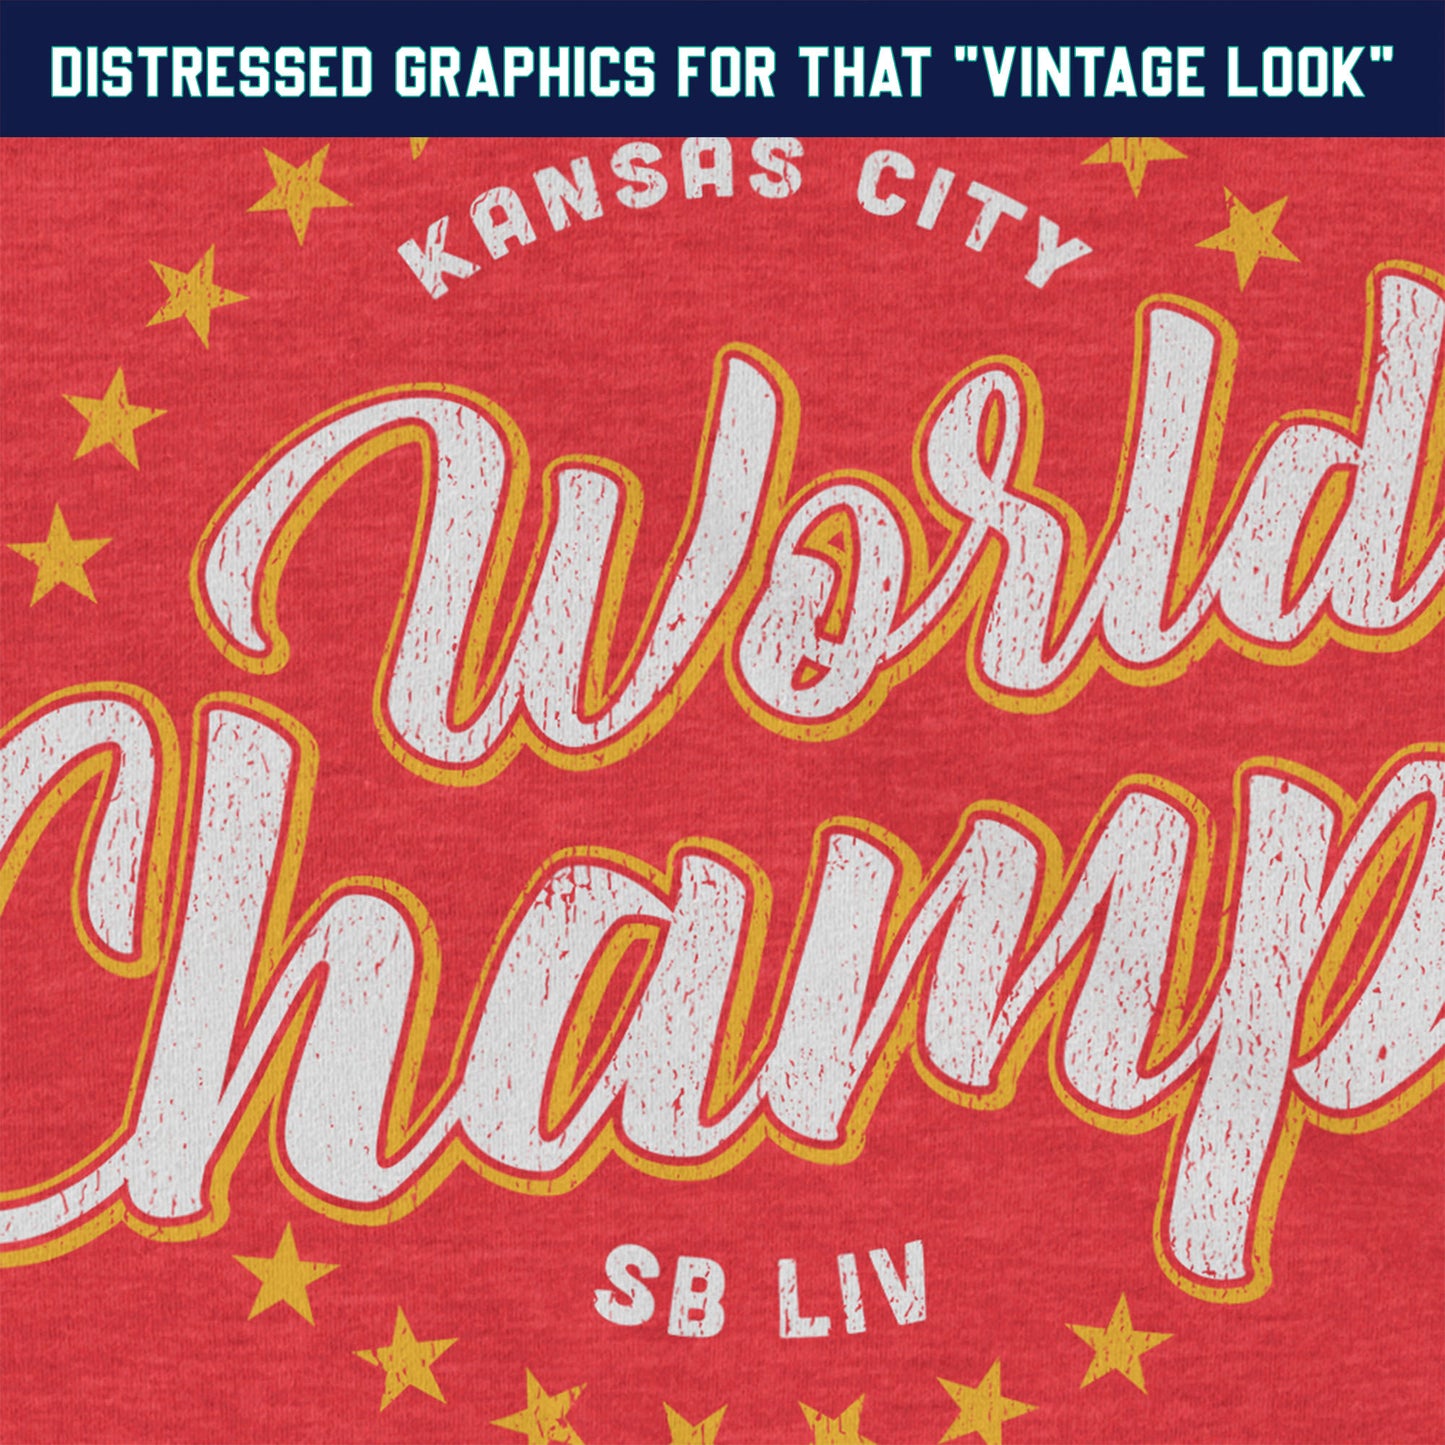 KC Swag Kansas City Chiefs yellow/white WORLD CHAMPS set in ring of stars on heather red t-shirt closeup details of distressed graphics